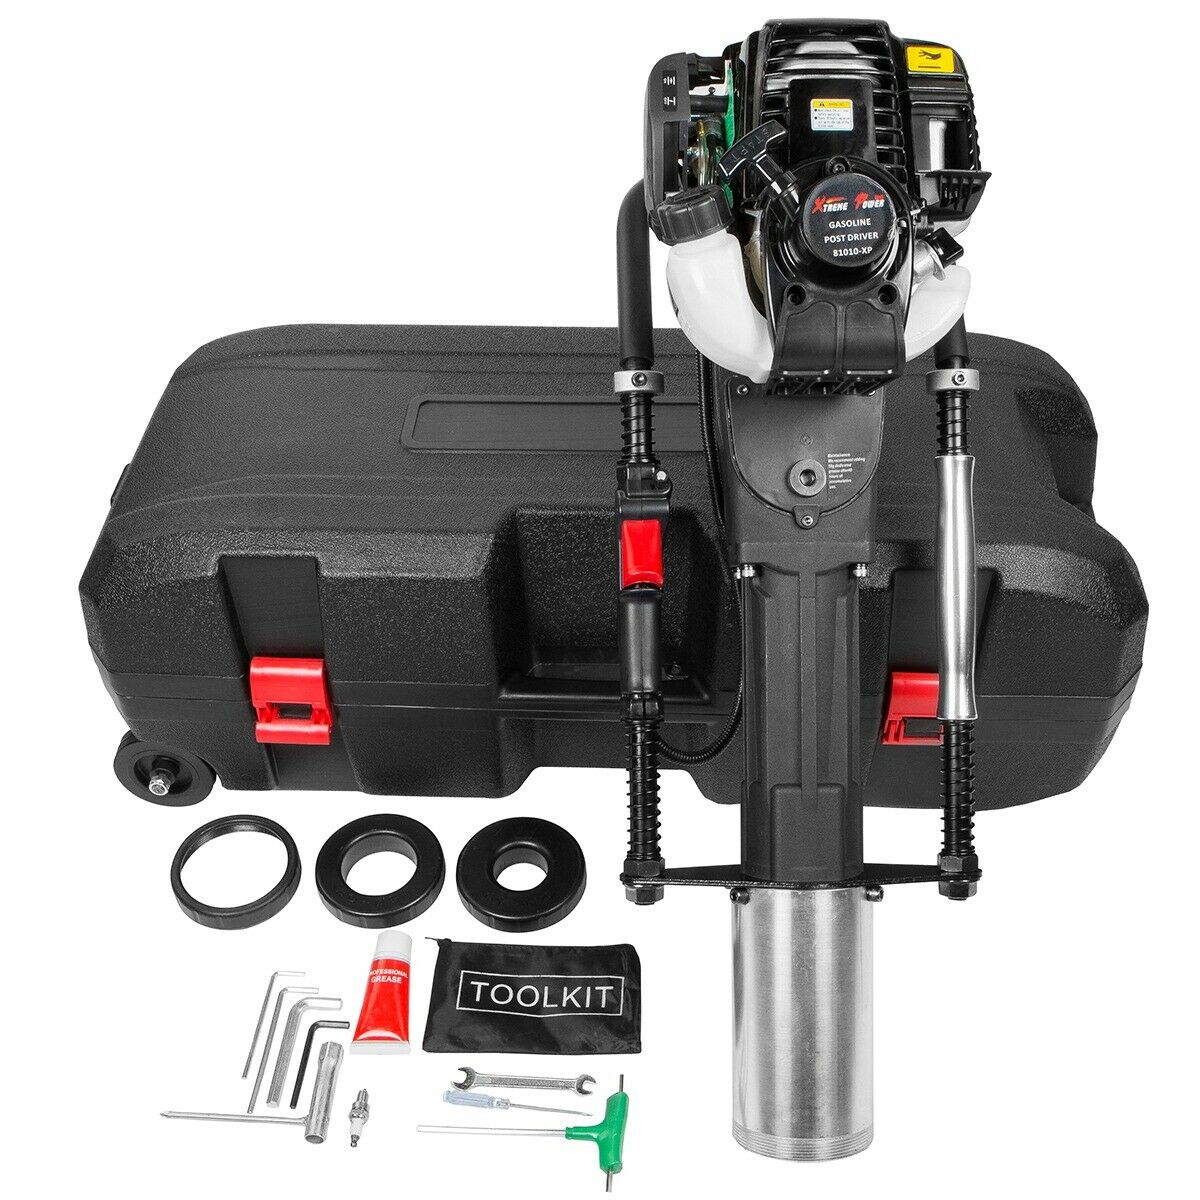 XtremepowerUS 38cc T-Post Driver Fence Post Driver Gas-Powered Piling Set 4-Stroke EPA Motor w/ Rolling Case - image 1 of 7